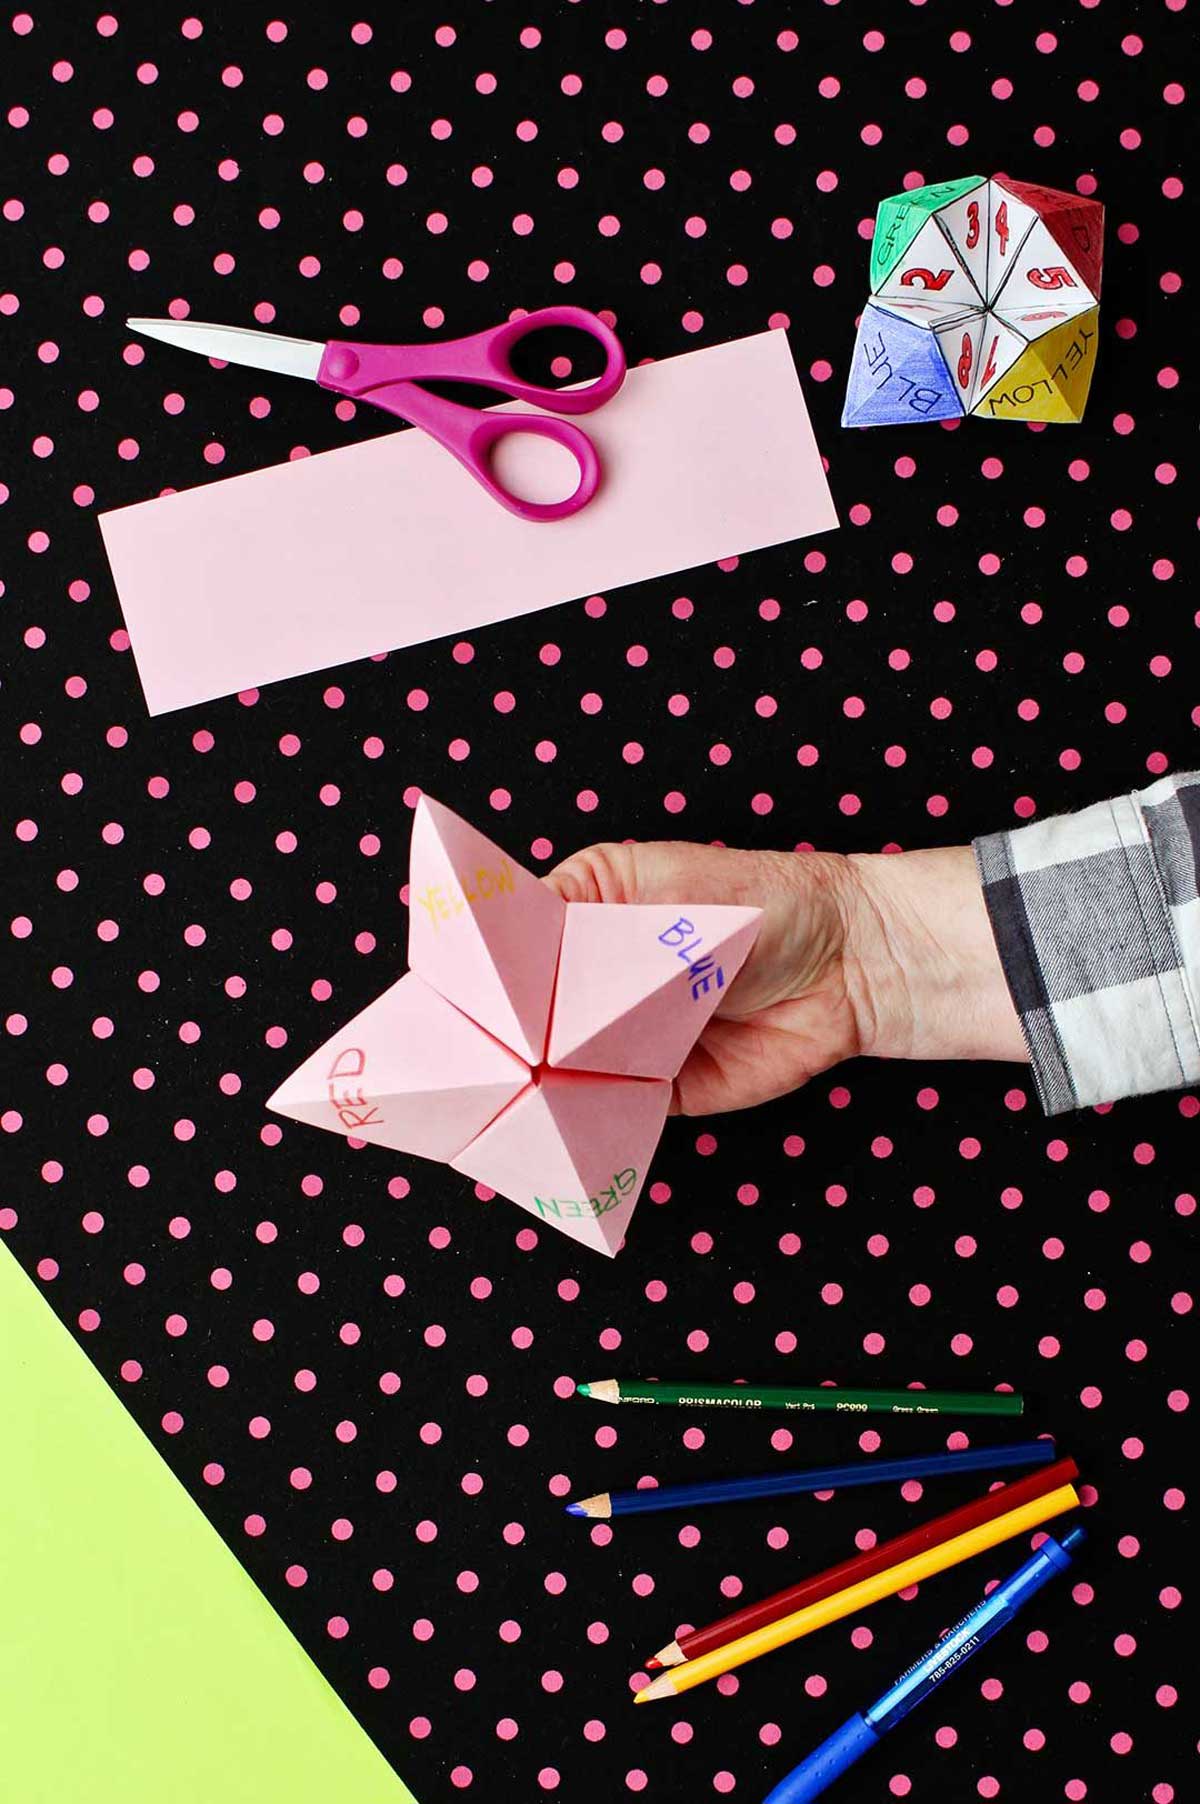 Hand holding completed paper fortune teller made of pink paper with "red, yellow, green, blue" tabs with scissors and colored pencils laying on a black and pink polka dotted background.